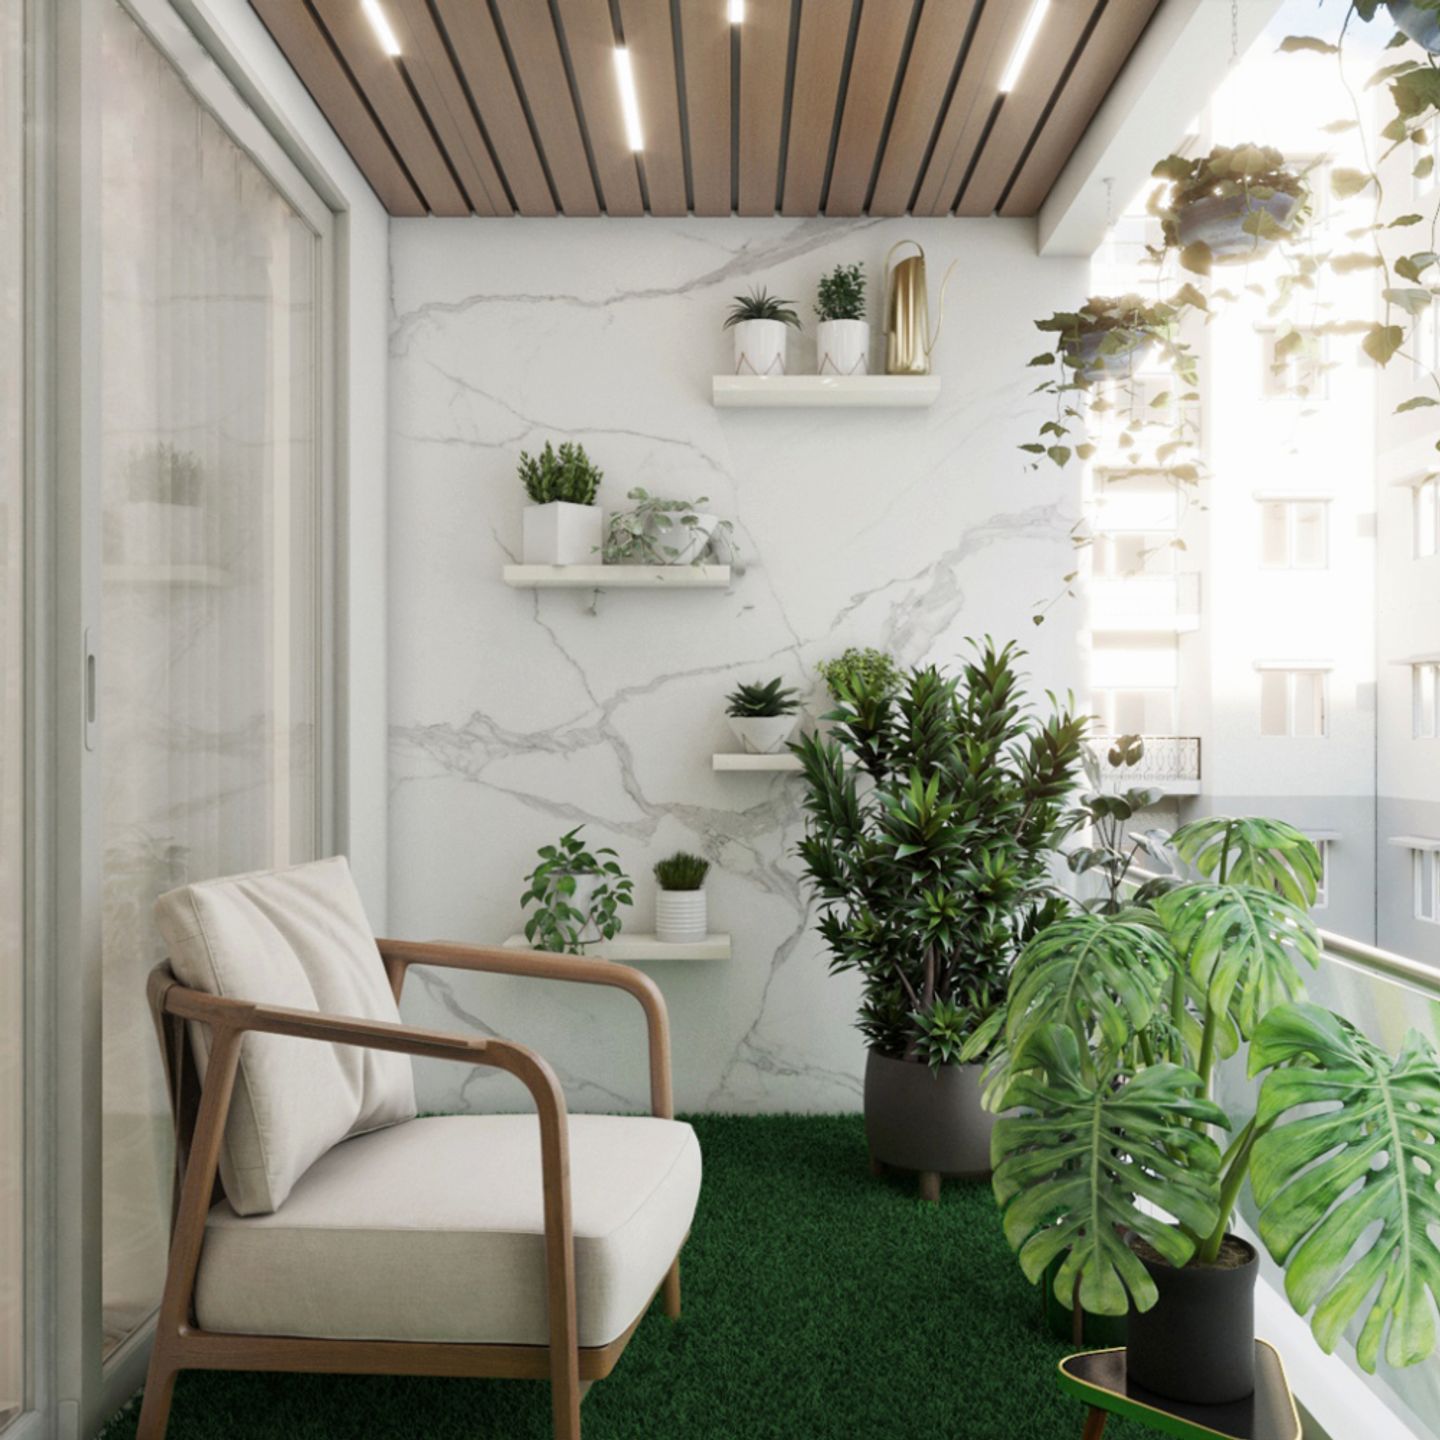 Balcony Design With Marble Tile Wall - Livspace